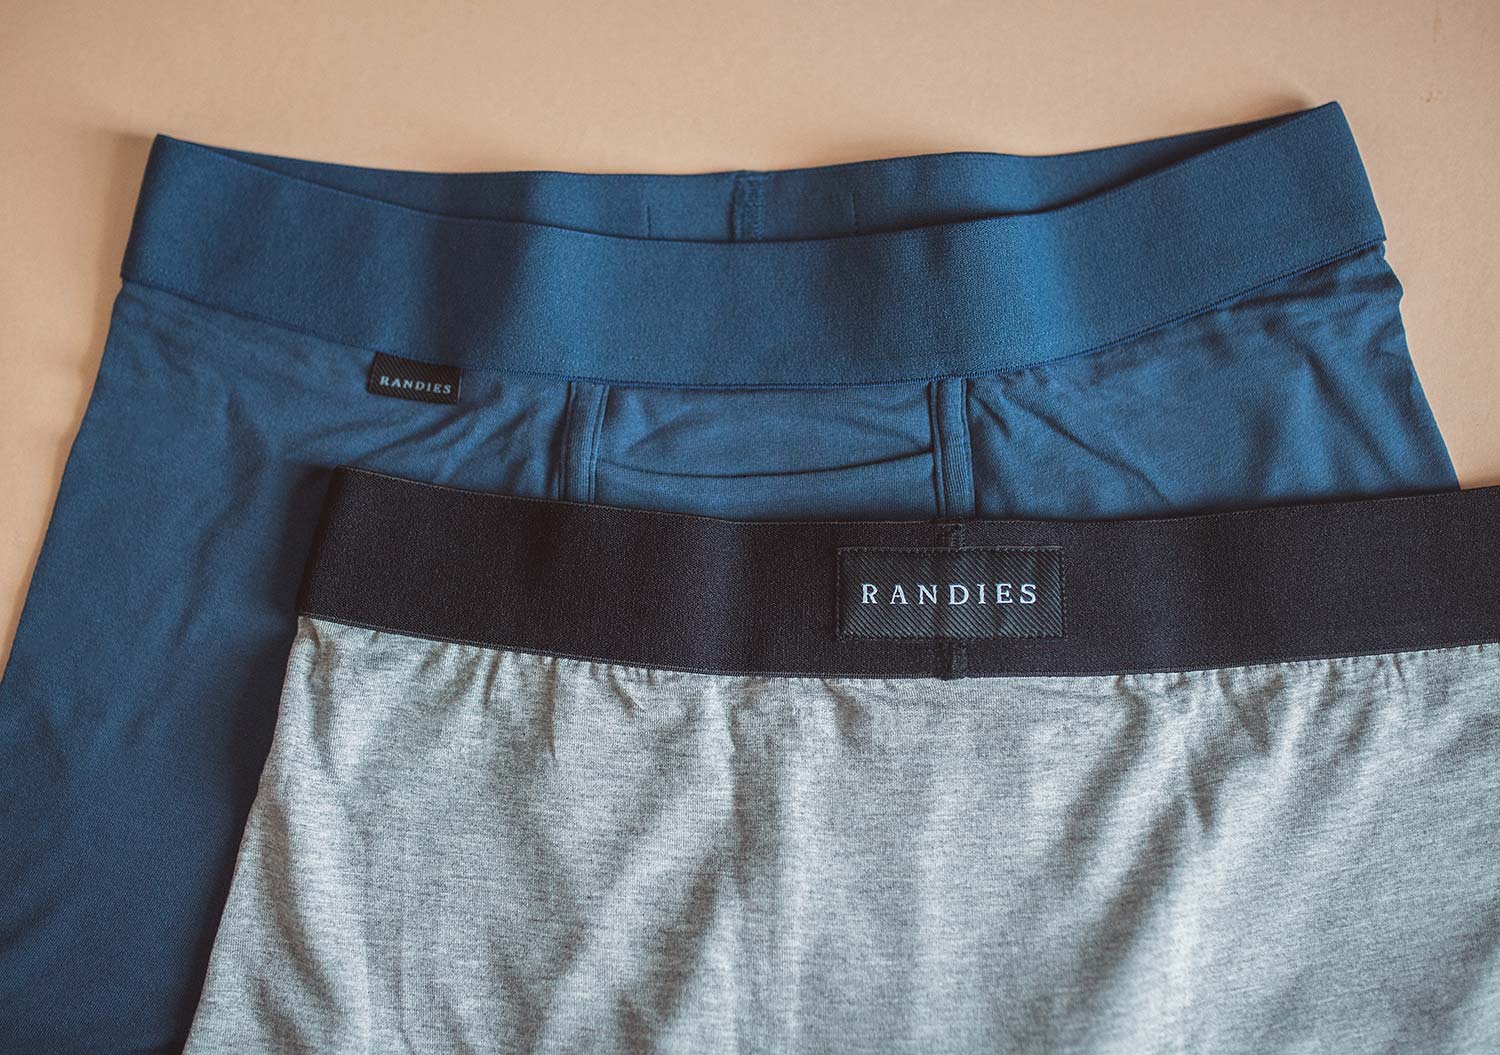 Randies Boxer Trunks Review - Your Average Guy